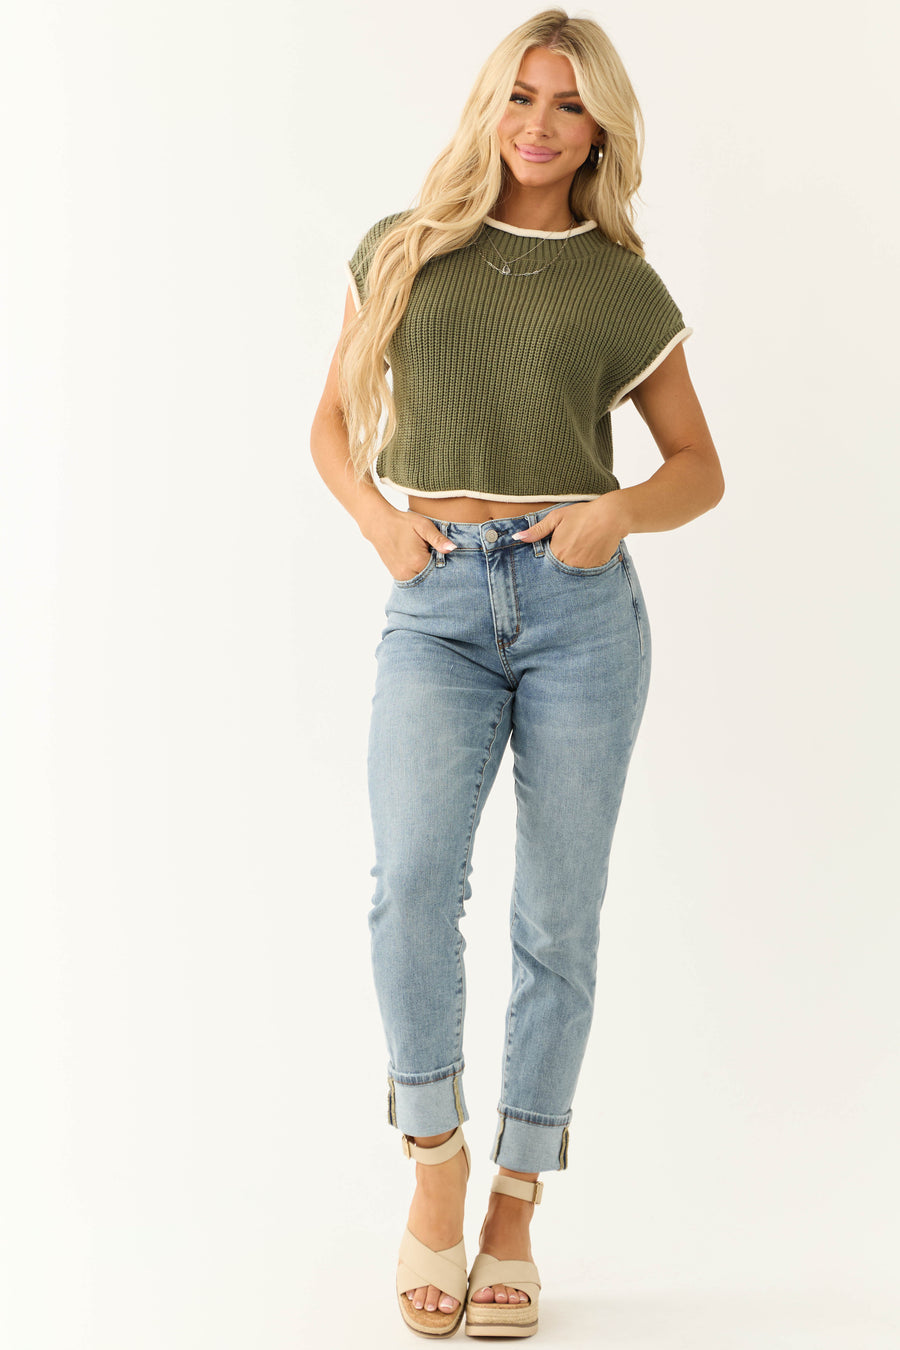 Army Green Knit Contrast Trim Top